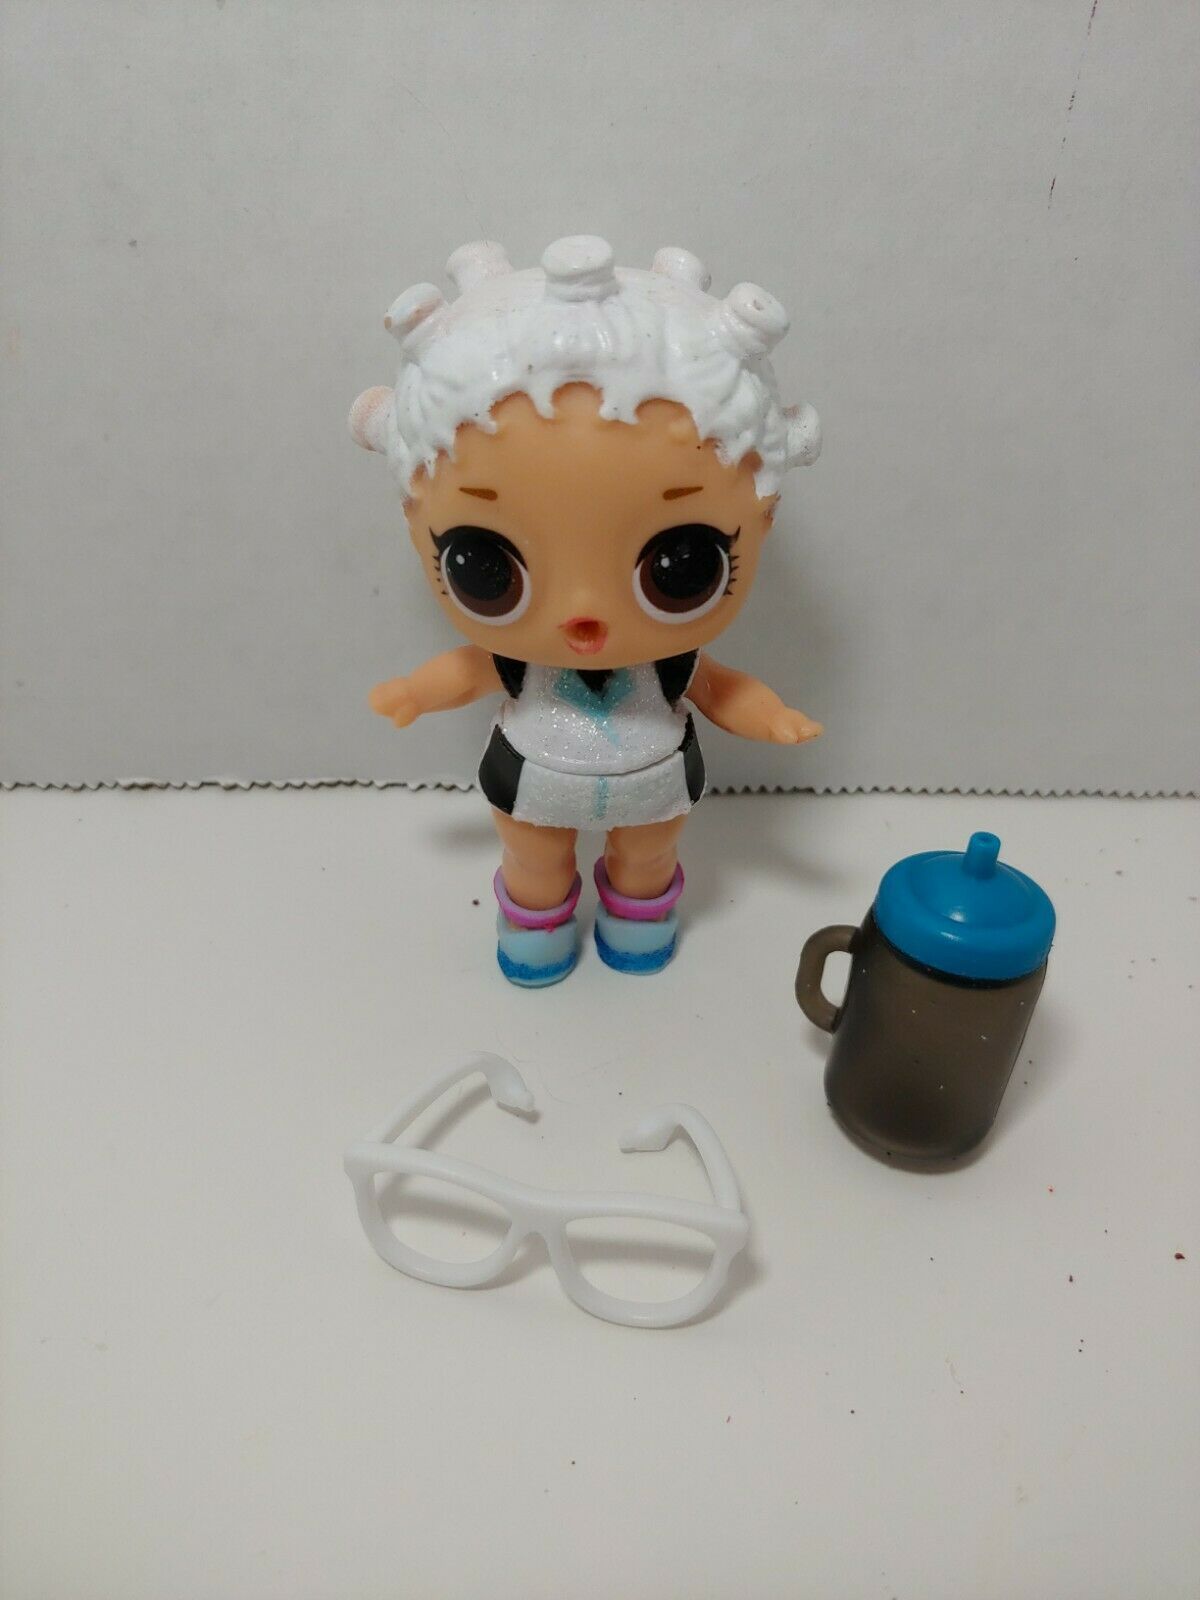 LOL Surprise Fresh doll w/ glasses white blue glitter outfit - $9.40